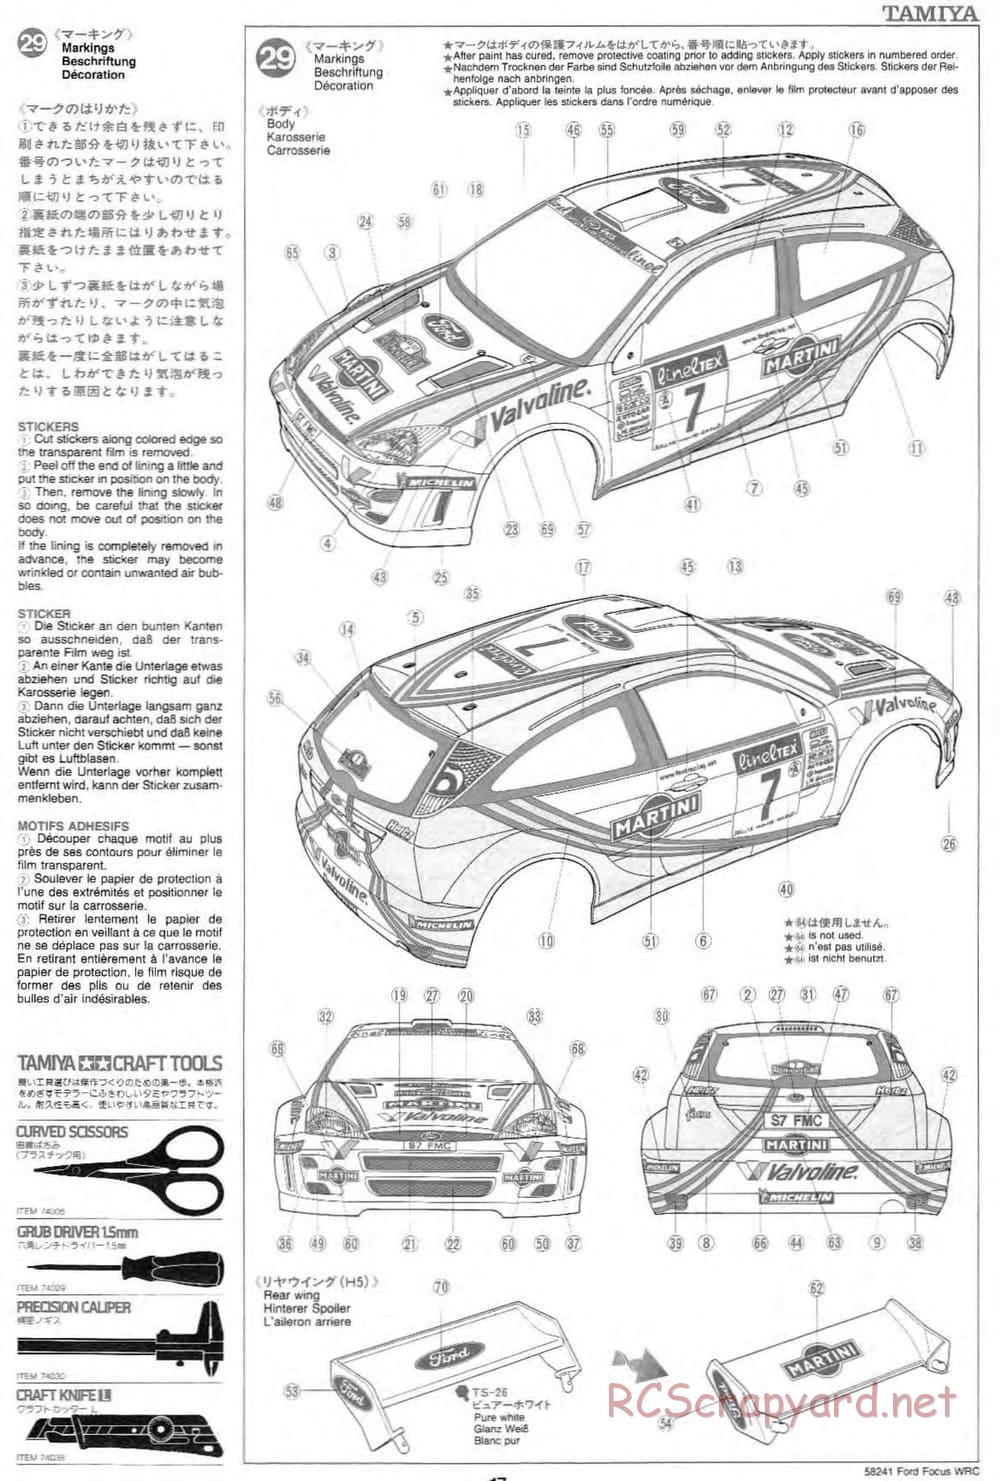 Tamiya - Ford Focus WRC - TL-01 Chassis - Manual - Page 17